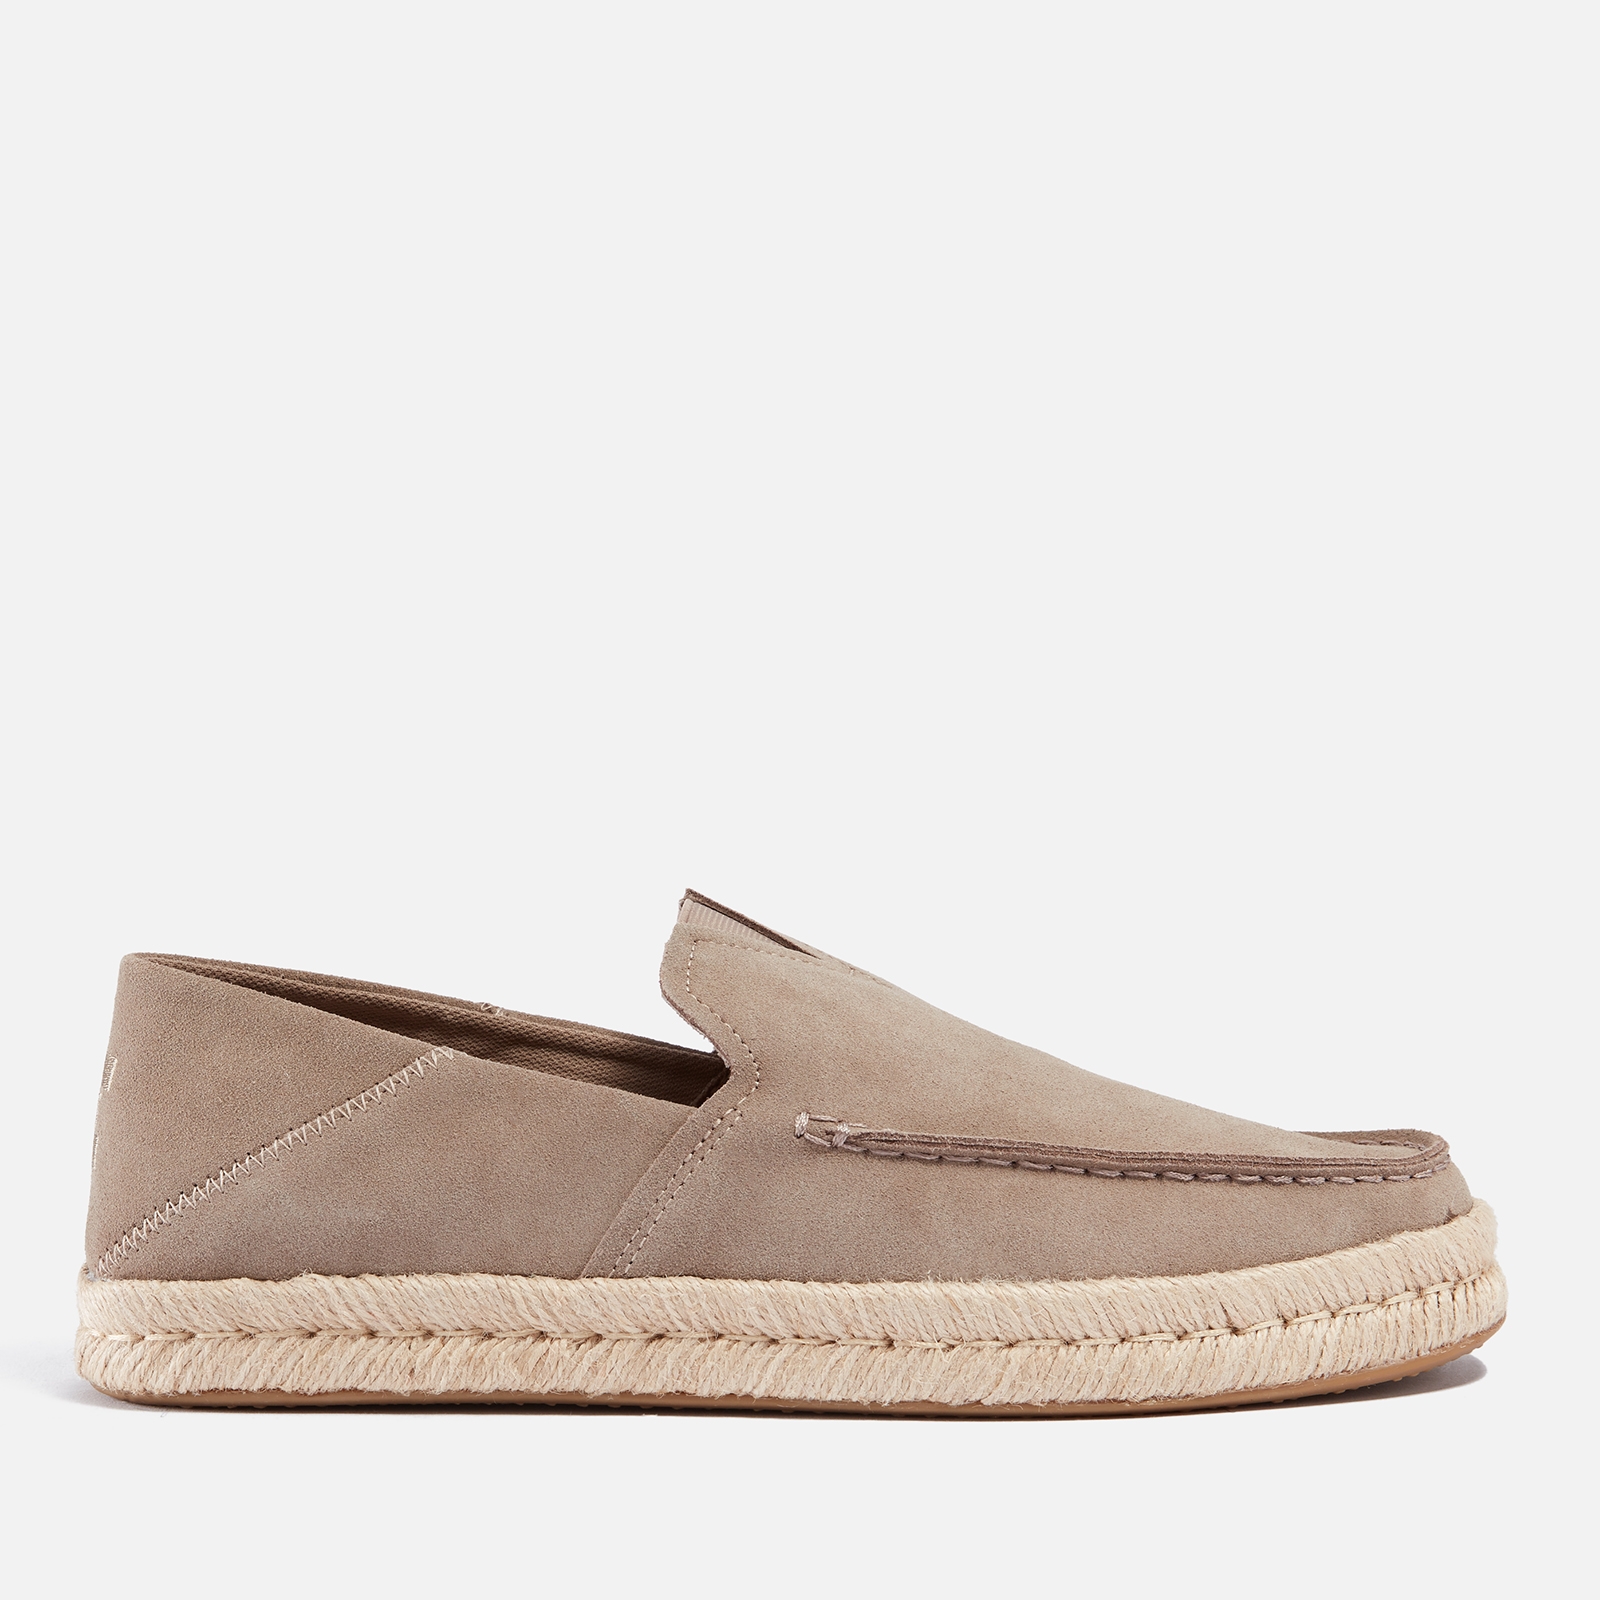 TOMS Men's Alonso Suede Loafers - Dune - UK 7